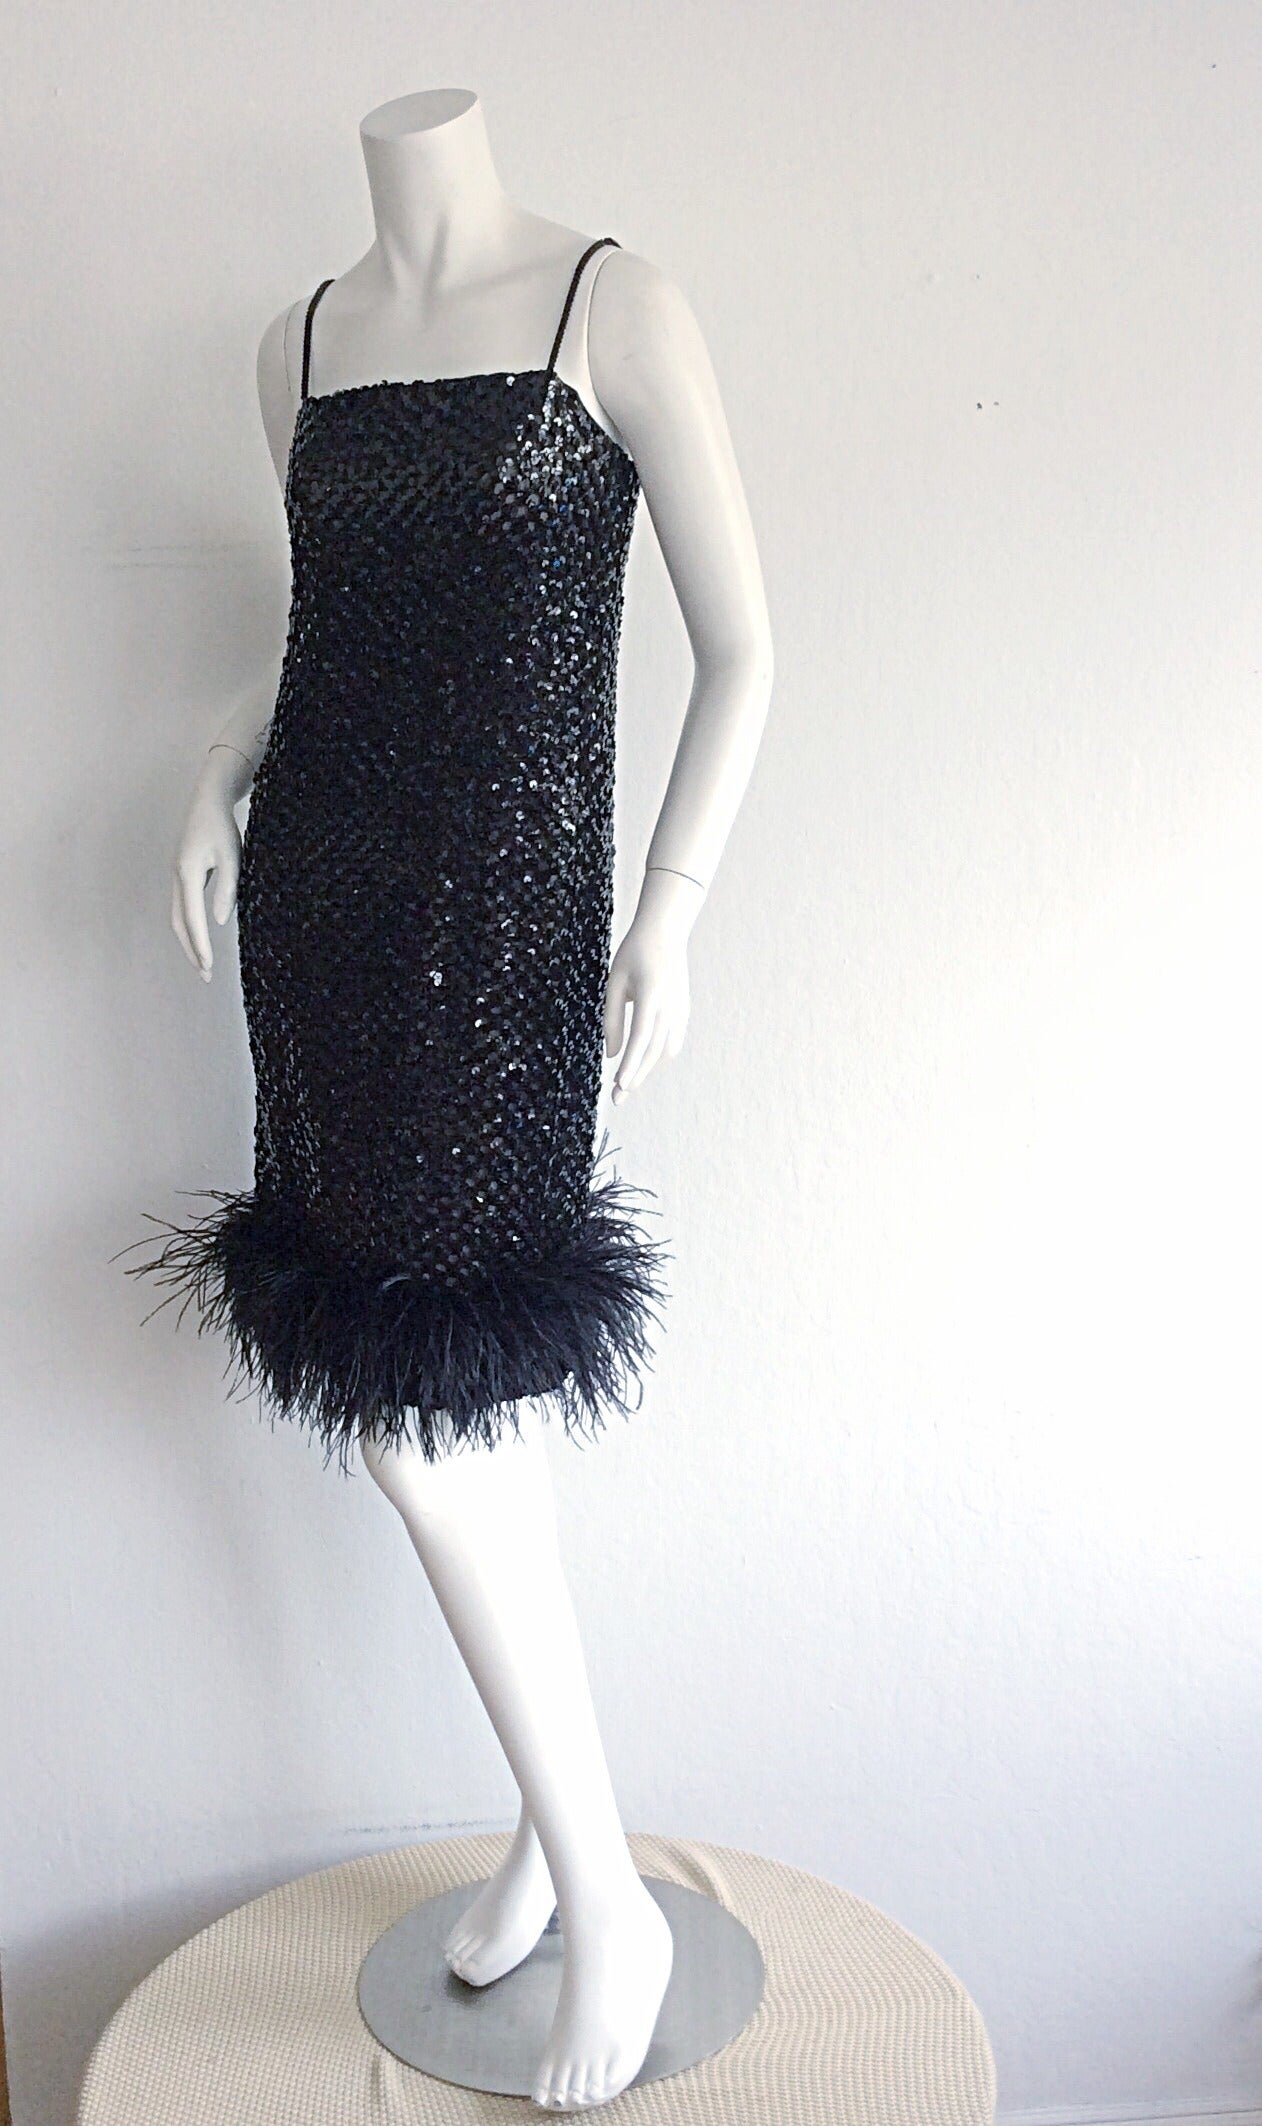 Stunning vintage I. Magnin 1960s black sequin dress, with ostrich feather hem! Beautiful nude chiffon double layer, that peeks through sequins. The perfect little black dress. Great alone, or belted. Perfect with heels, slides, or boots.  Metal